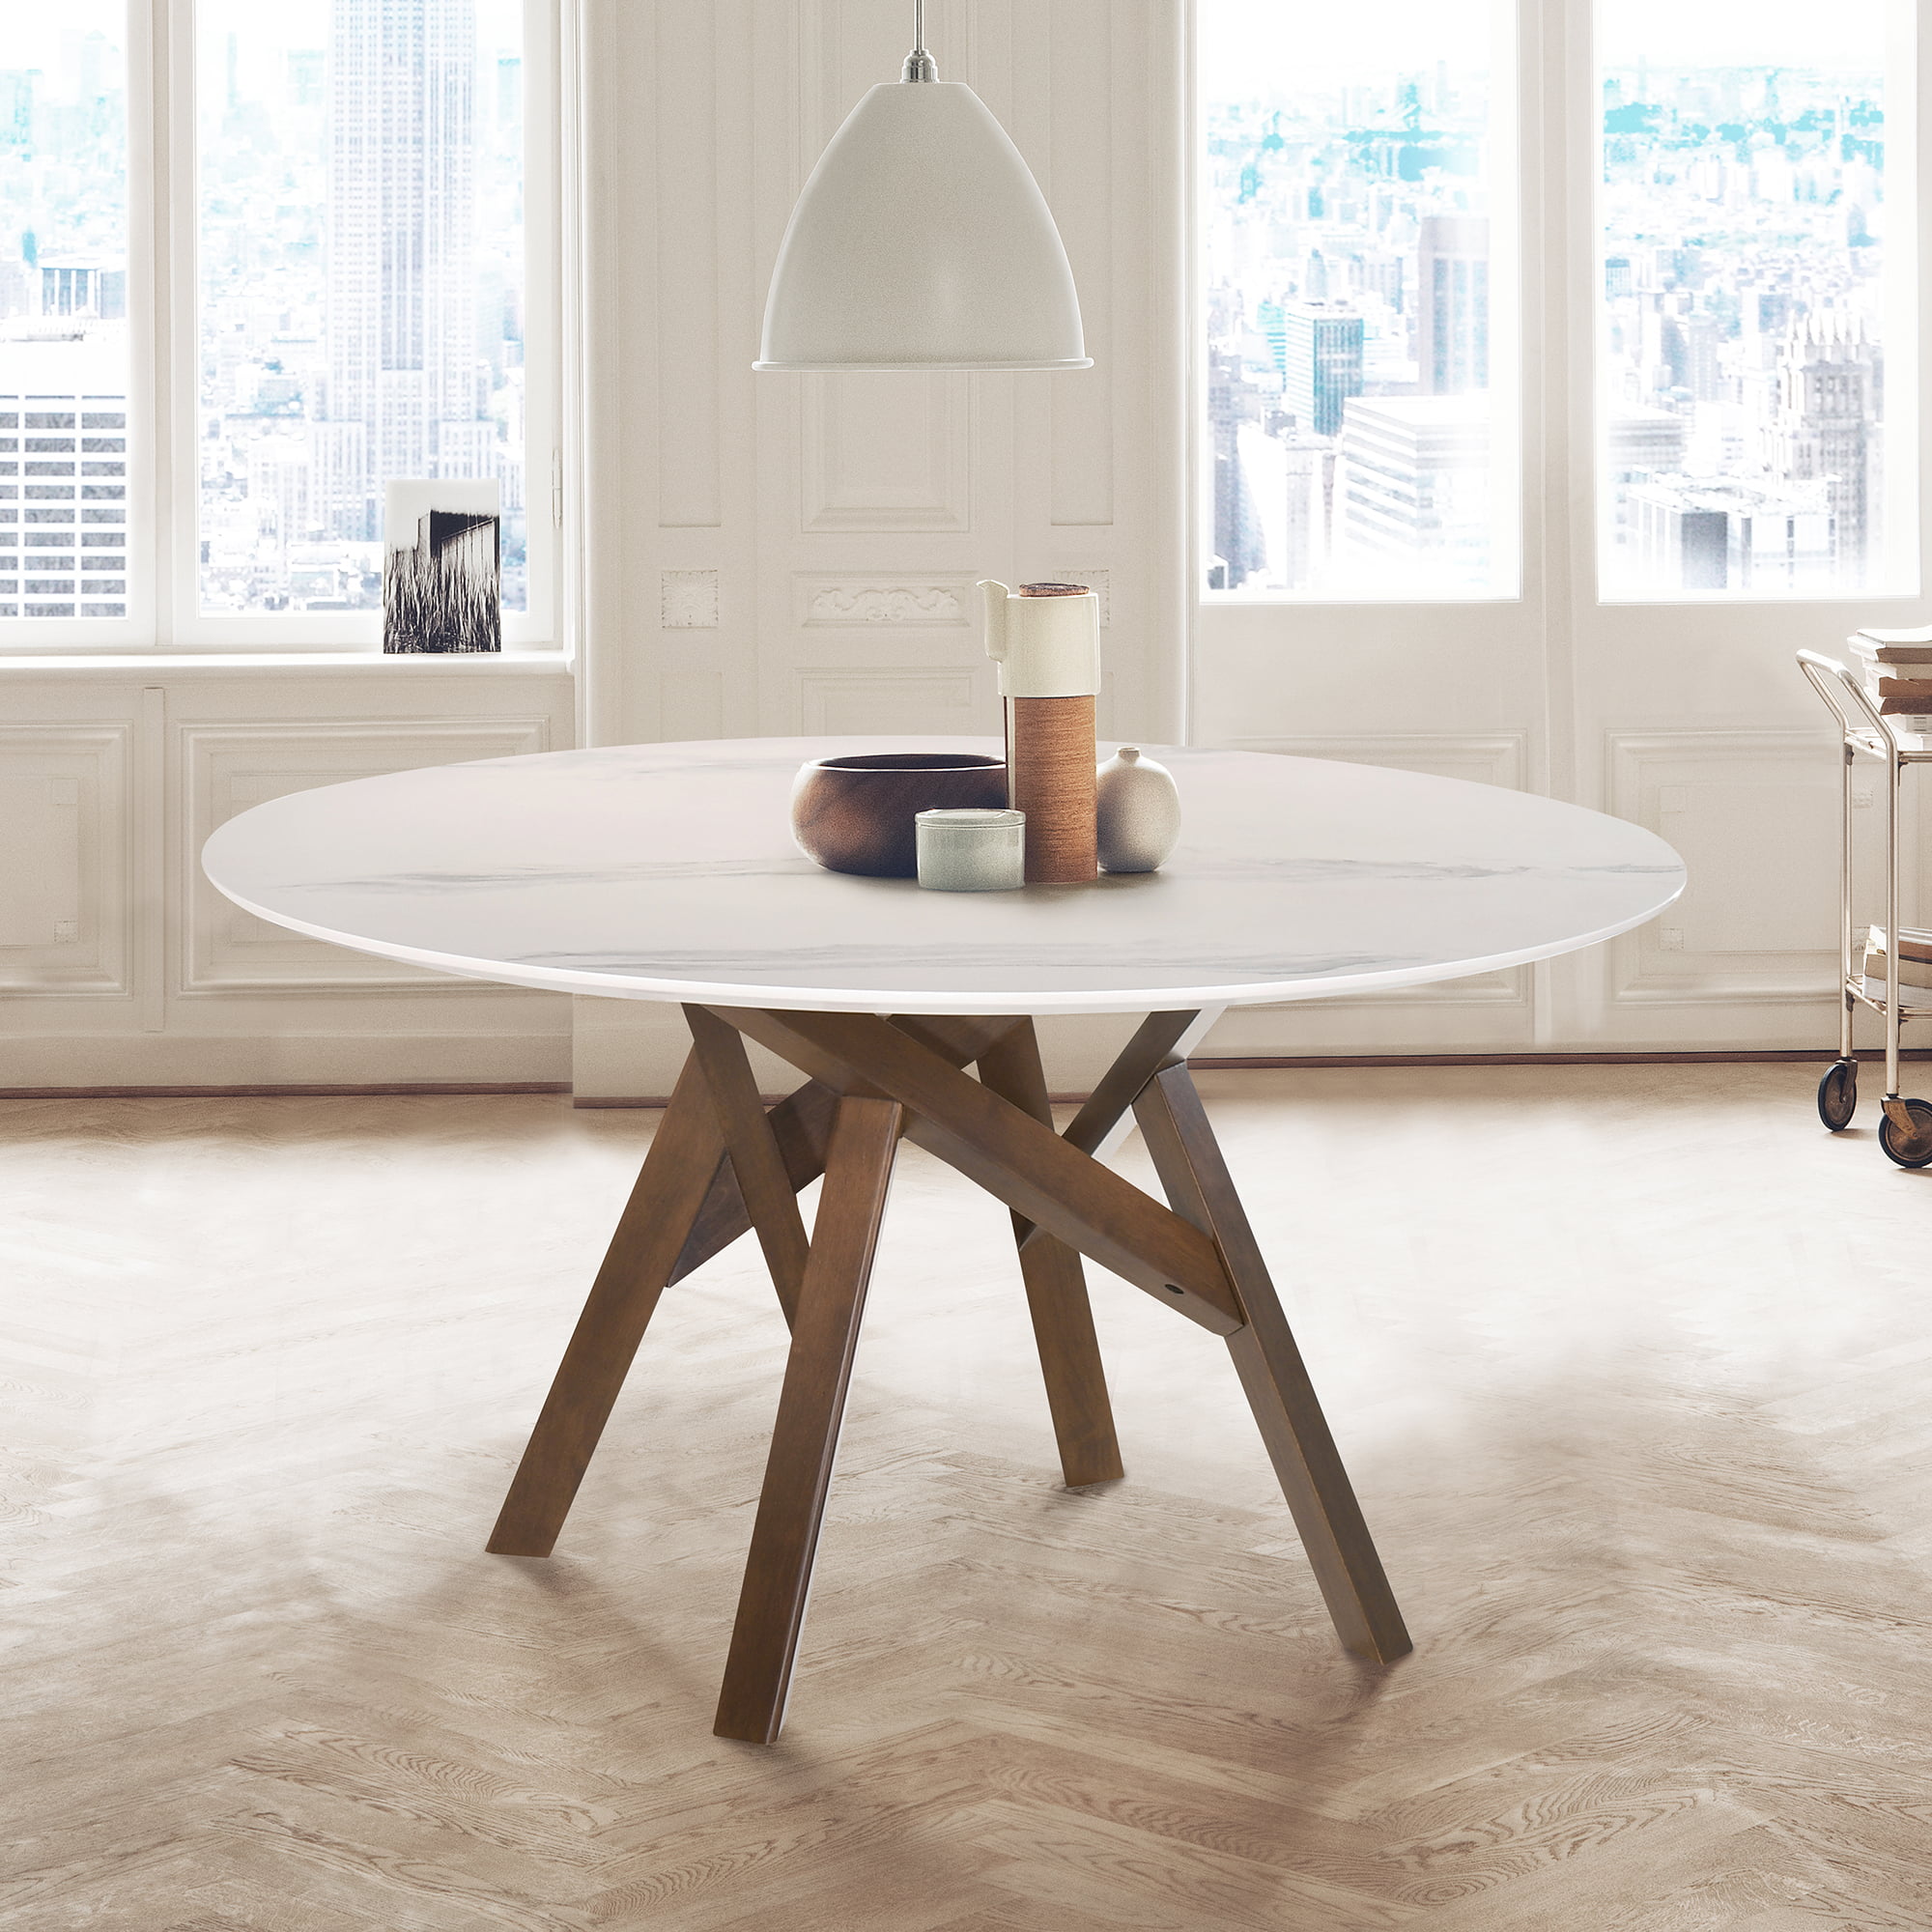 Round Dining Table White And Wood ~ Gray Round Dining Room Table / The ...